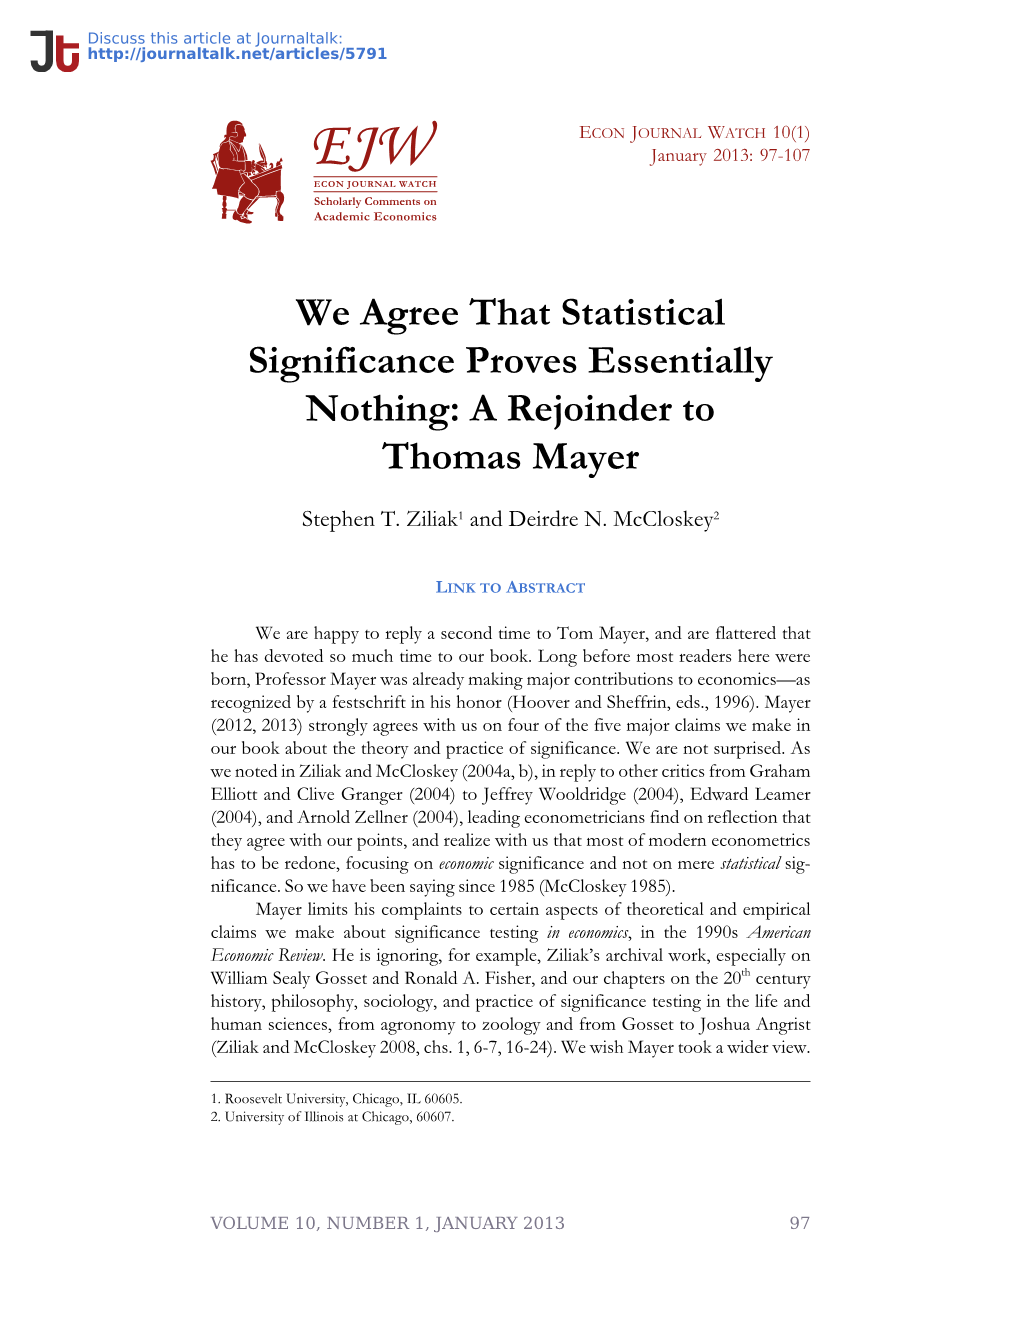 We Agree That Statistical Significance Proves Essentially Nothing: a Rejoinder to Thomas Mayer